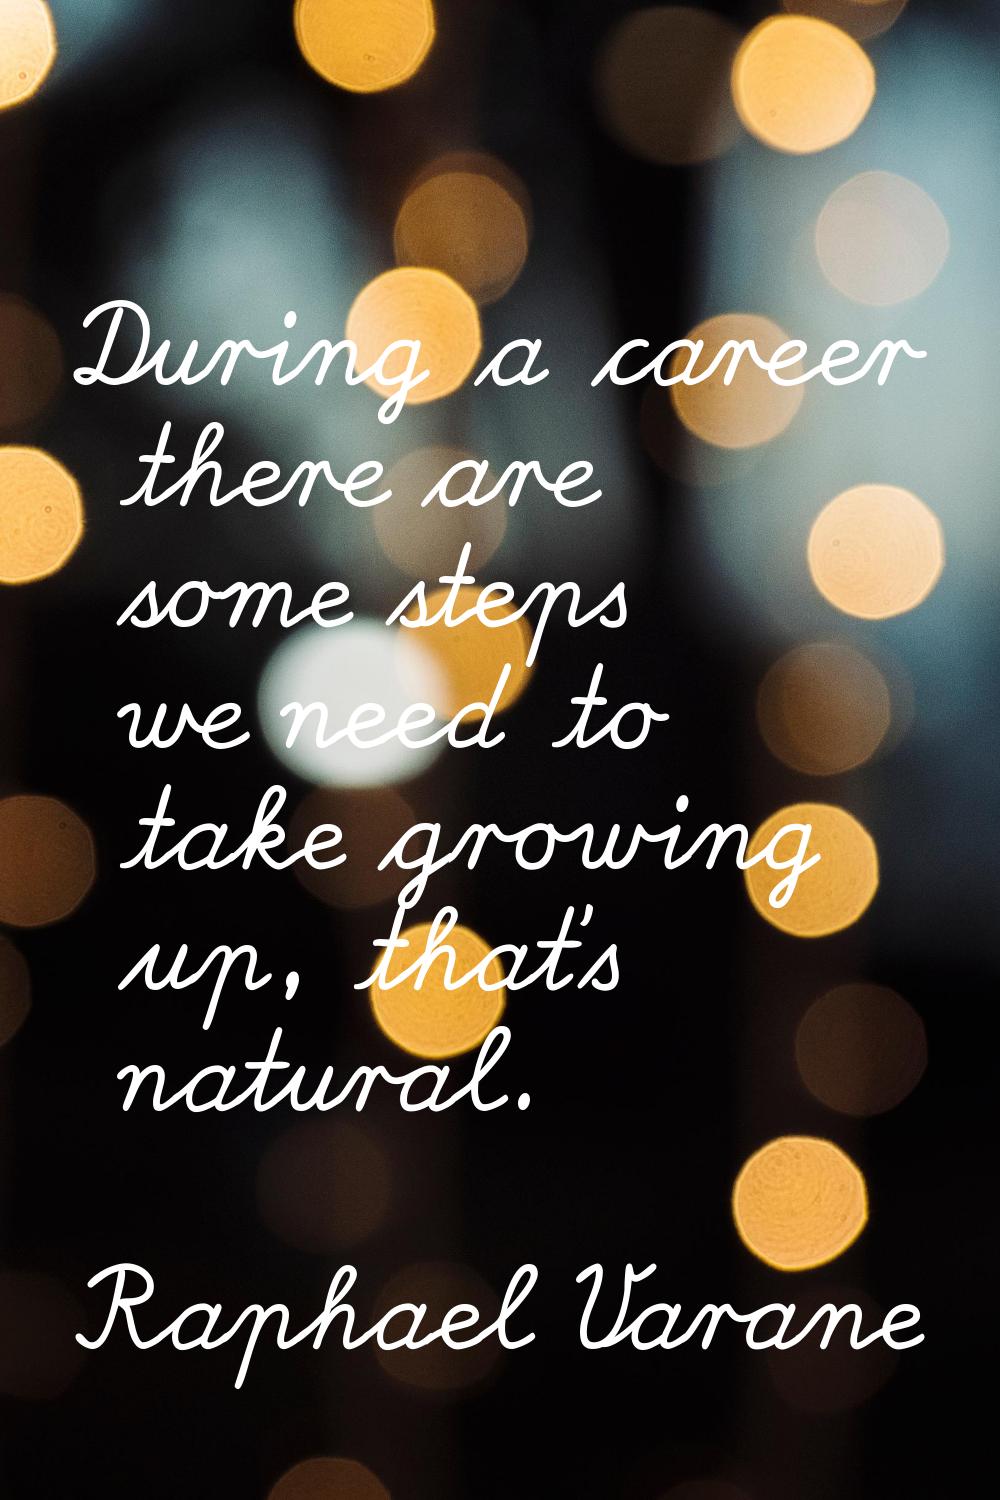 During a career there are some steps we need to take growing up, that's natural.